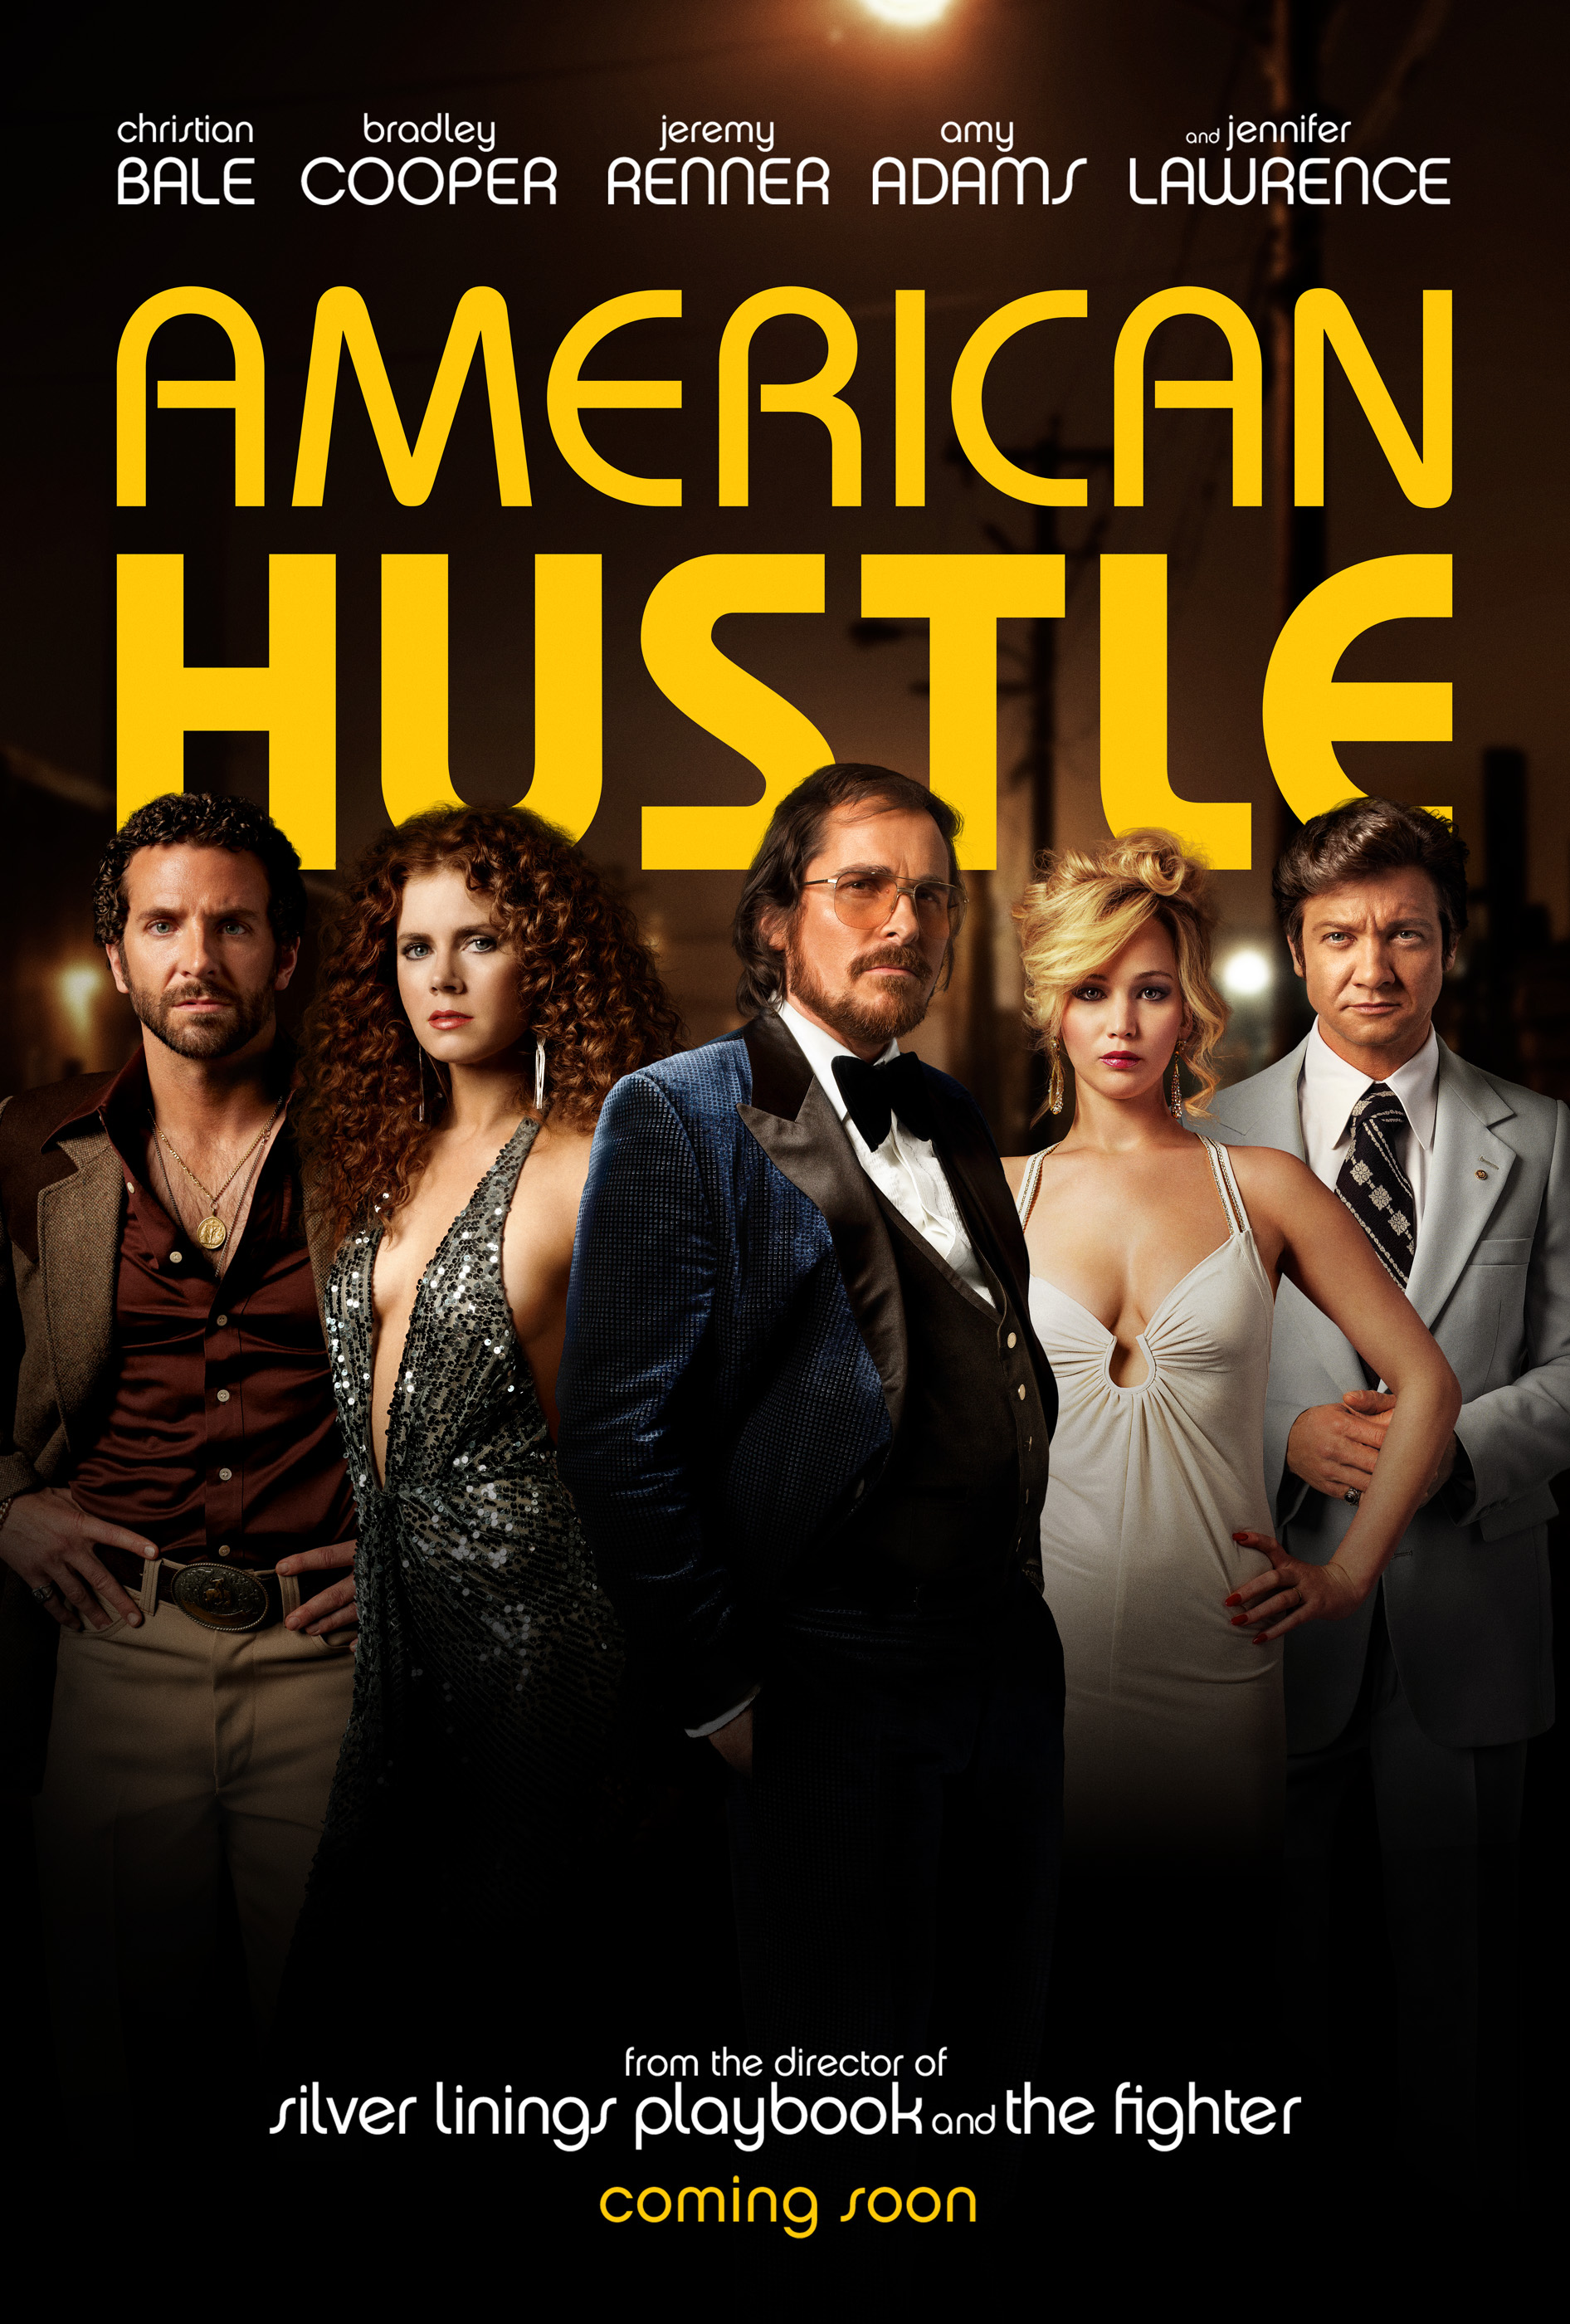 America: The Great Hustle (and Jennifer Lawrence)